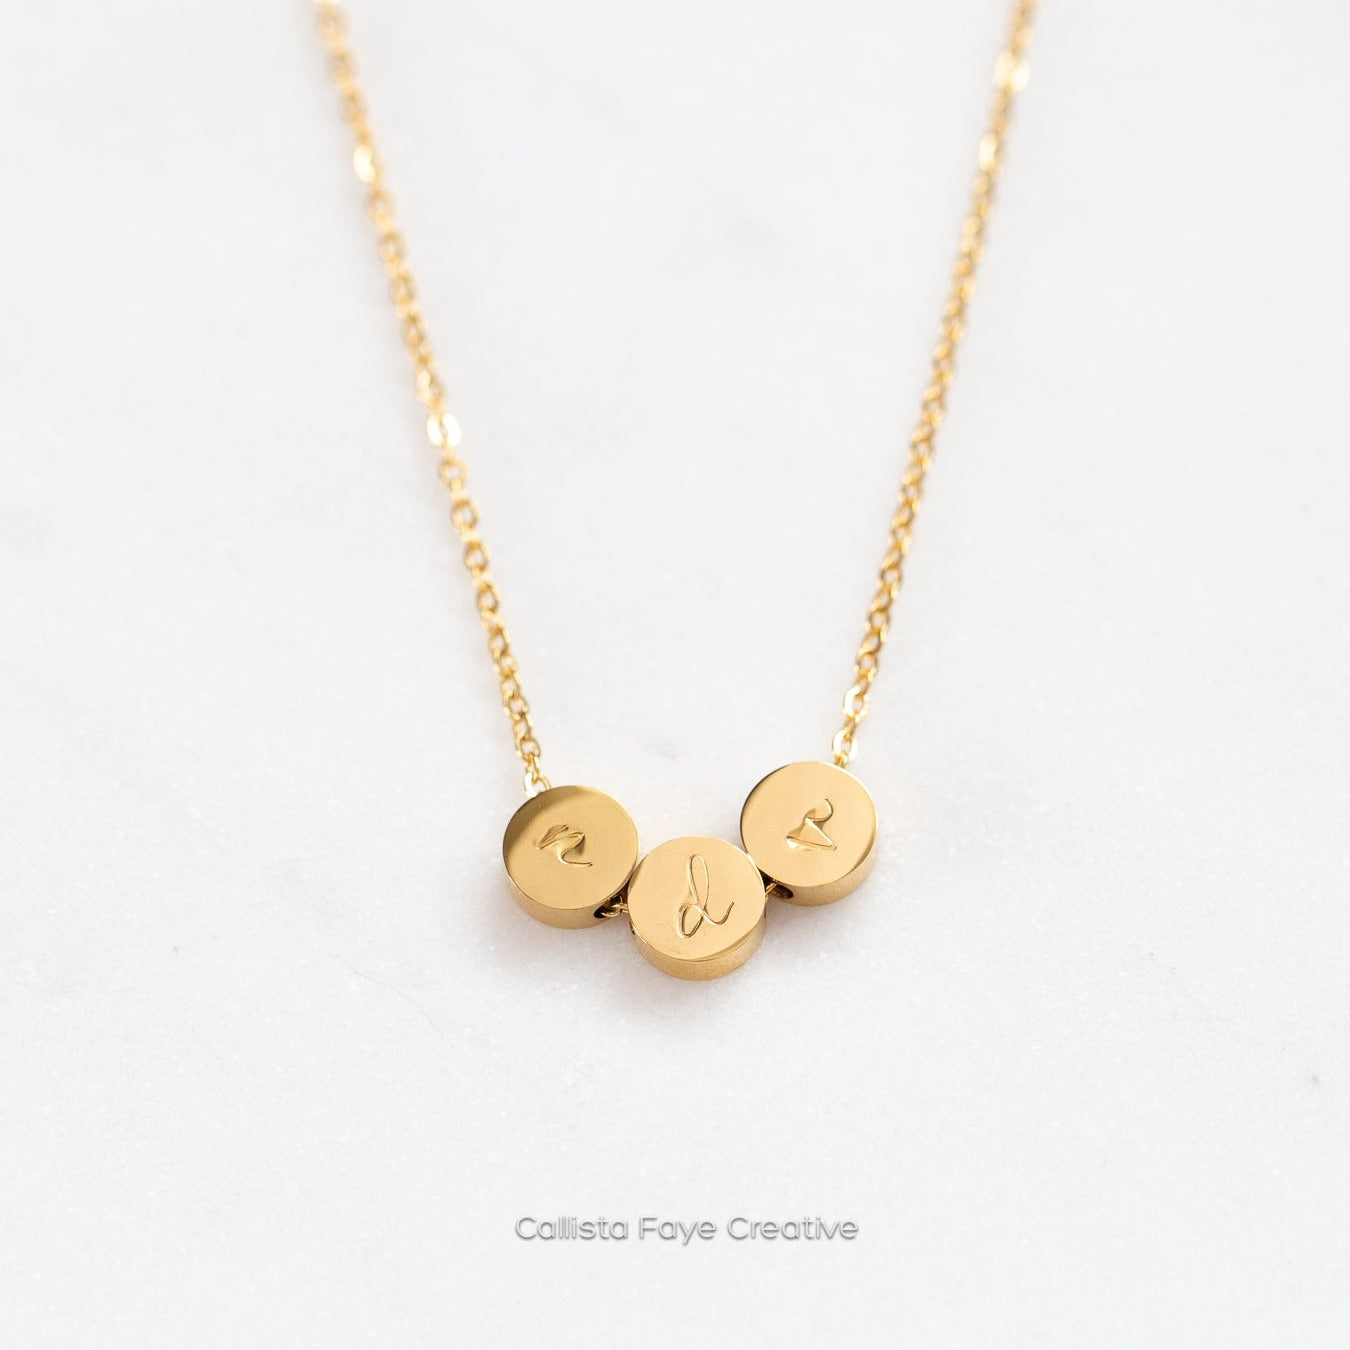 Custom Initial / Birth Flower Mini Coin BEAD Necklace, Personalized Necklaces callistafaye 3 Beads Gold 